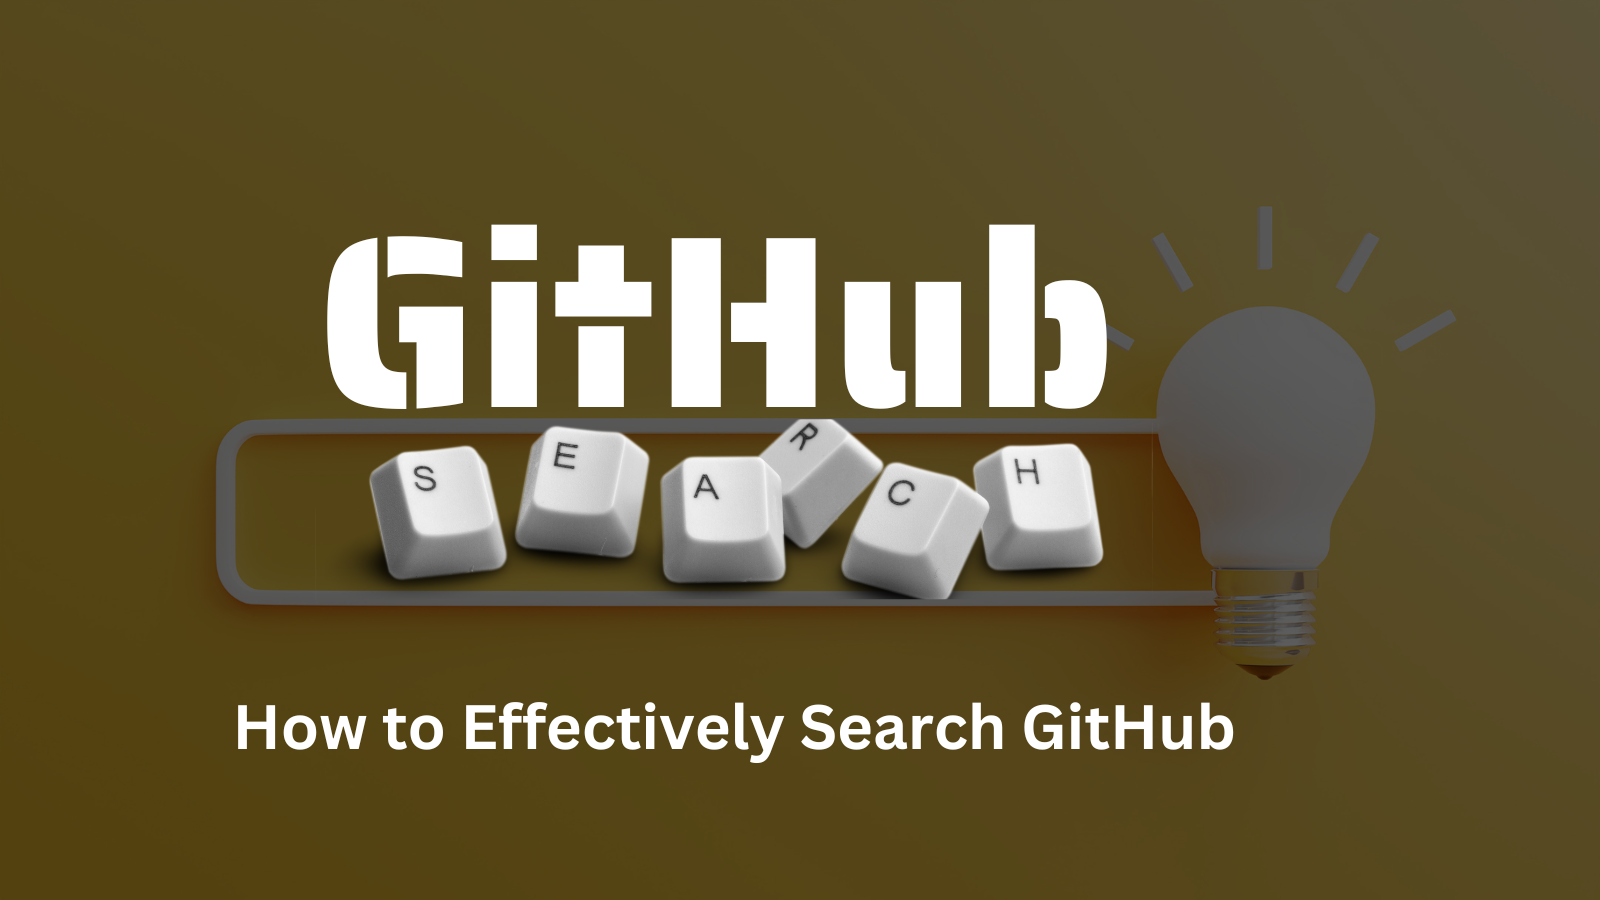 GitHub Search Tips – How to Search Issues, Repos, and More Effectively on GitHub